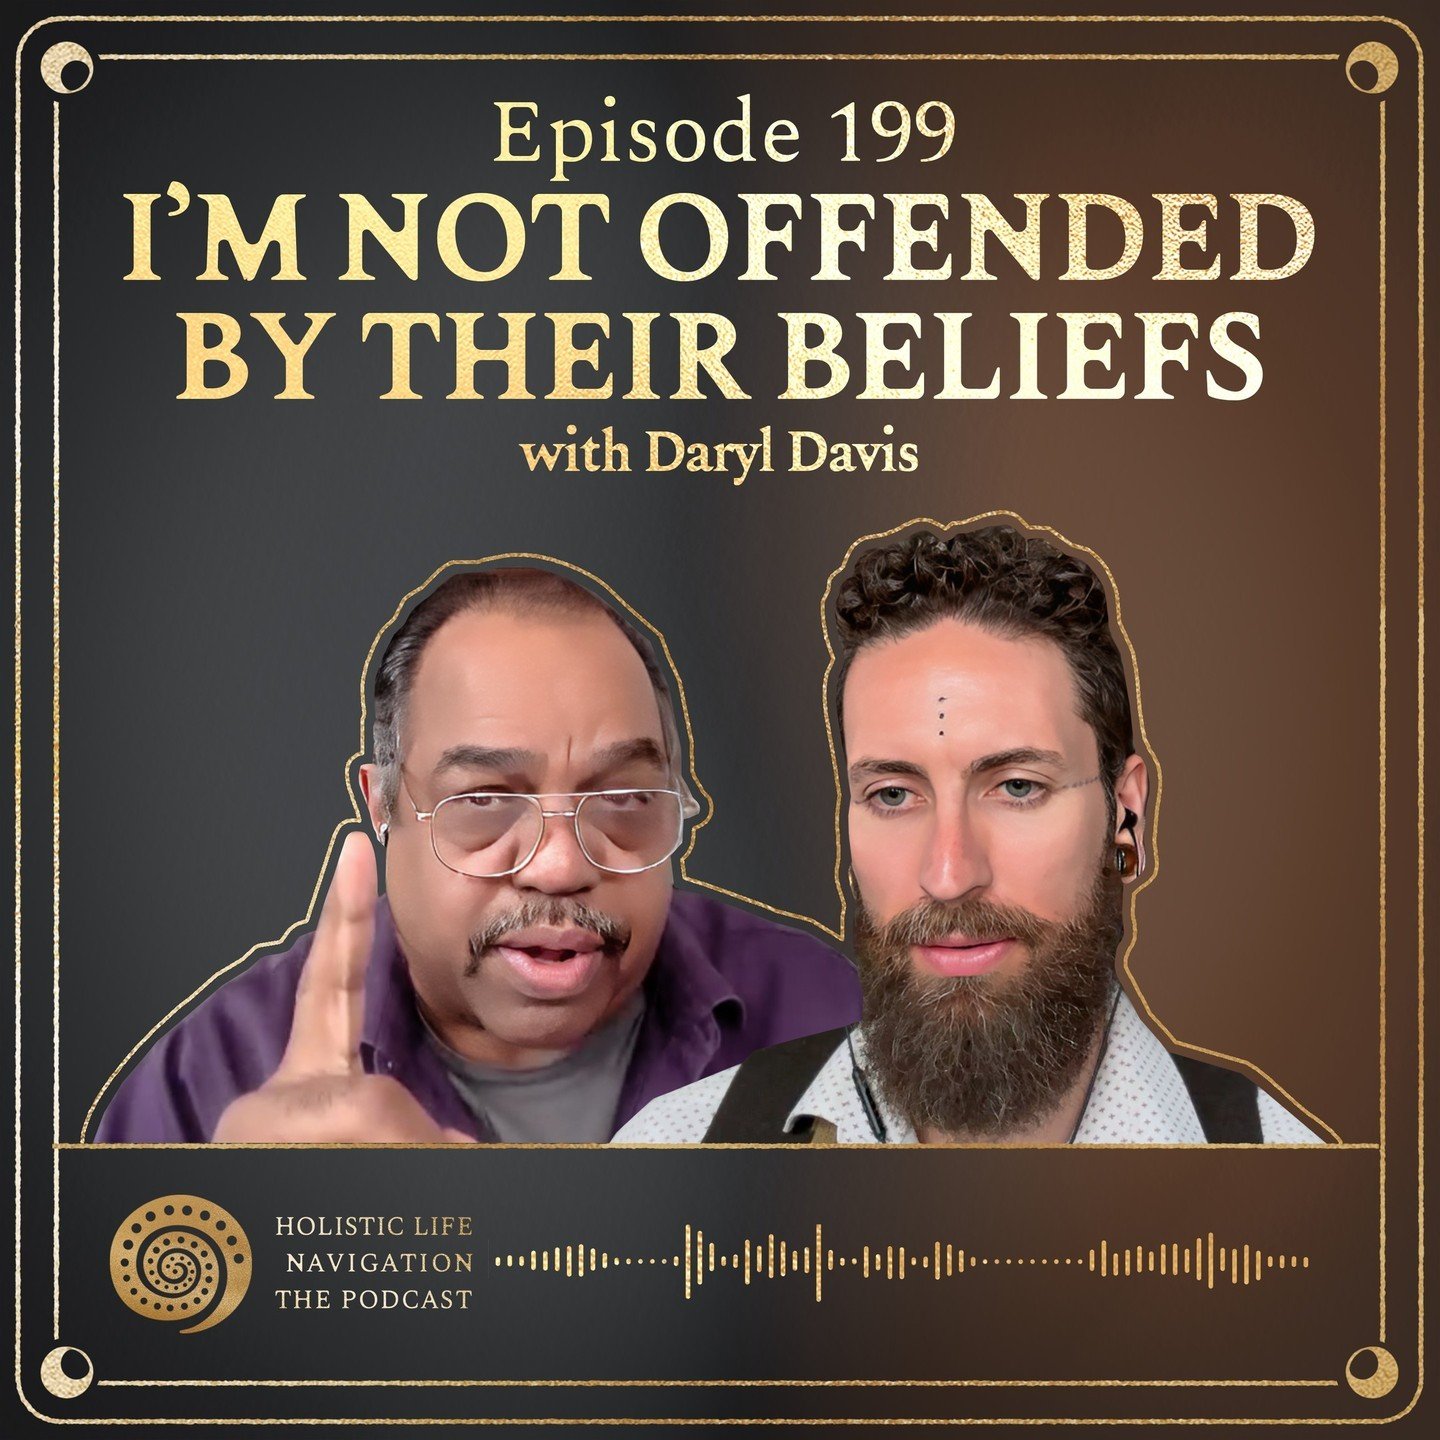 On today's episode, Luis is joined by Daryl Davis (@realdaryldavis) whose efforts to fight racism by engaging members of the Ku Klux Klan (KKK) resulted in over 200 klansmen leaving and denouncing the KKK. ⁠
⁠
Luis and Daryl have an intriguing discus